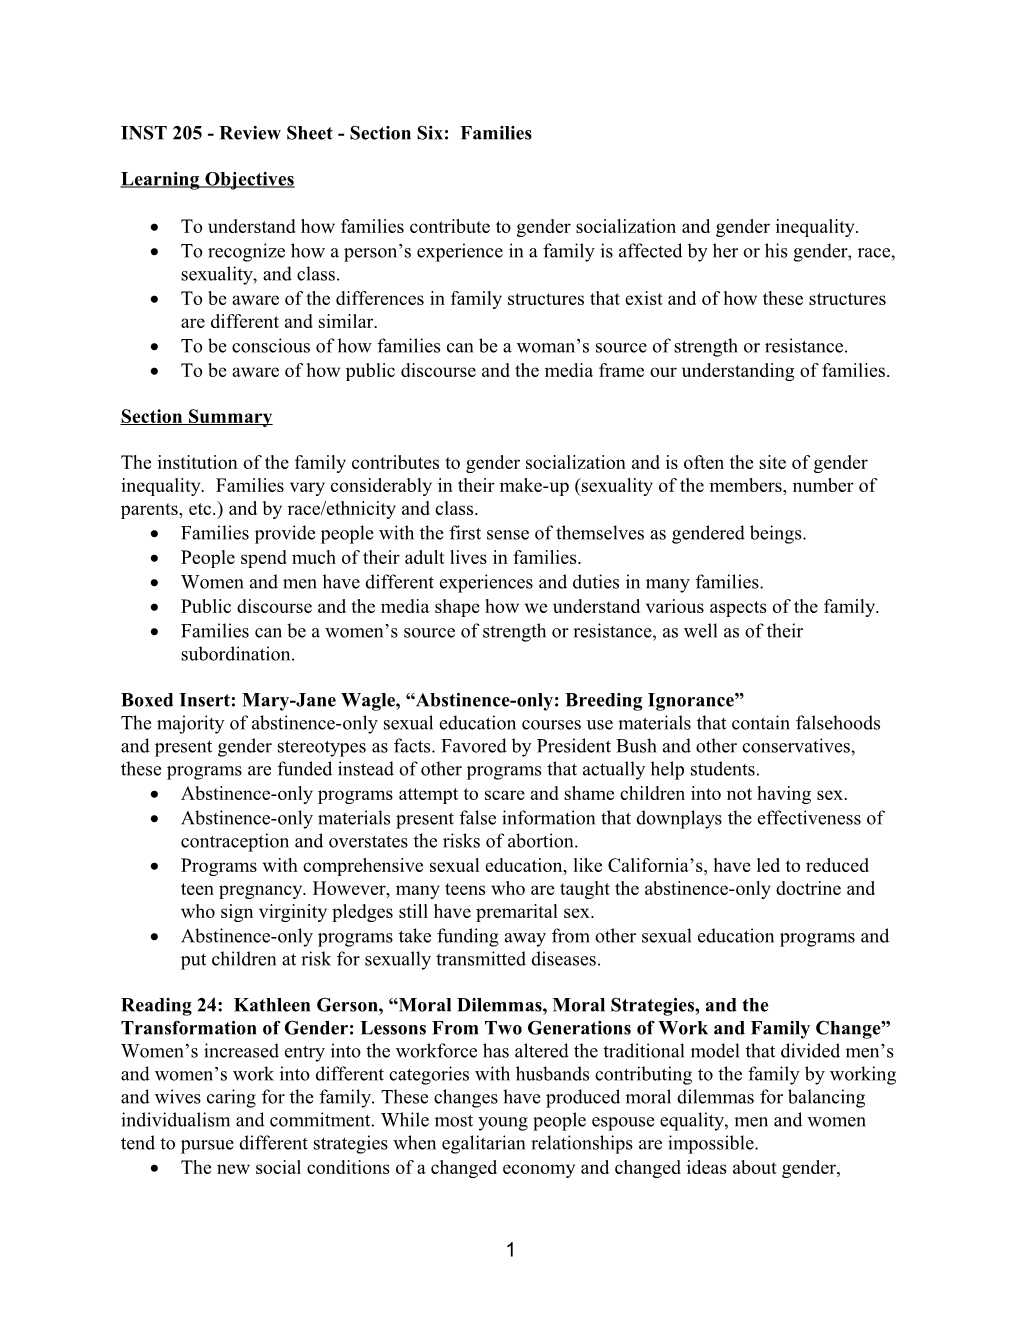 INST 205 - Review Sheet - Section Six: Families